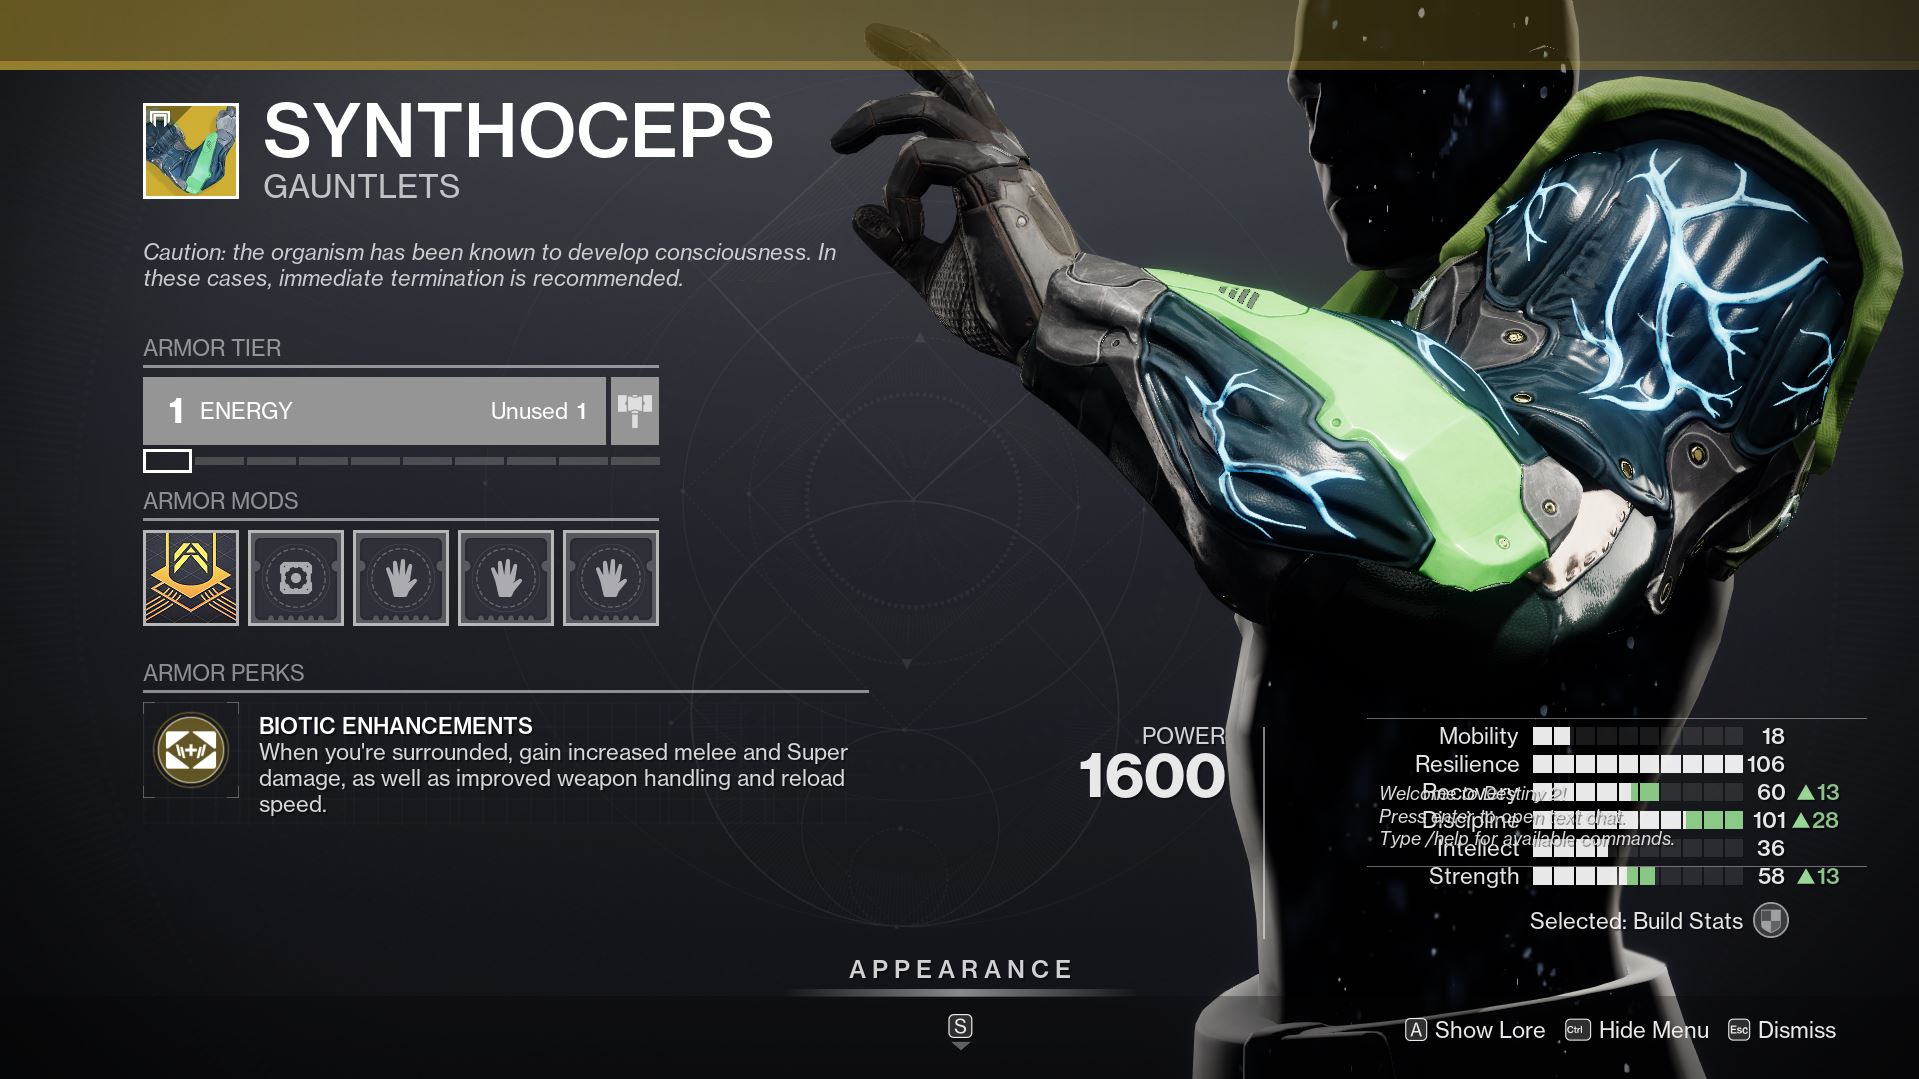 Destiny 2 Synthoceps Destiny 2 Has Seemingly Leaked New Exotic Armor Changes In-Game